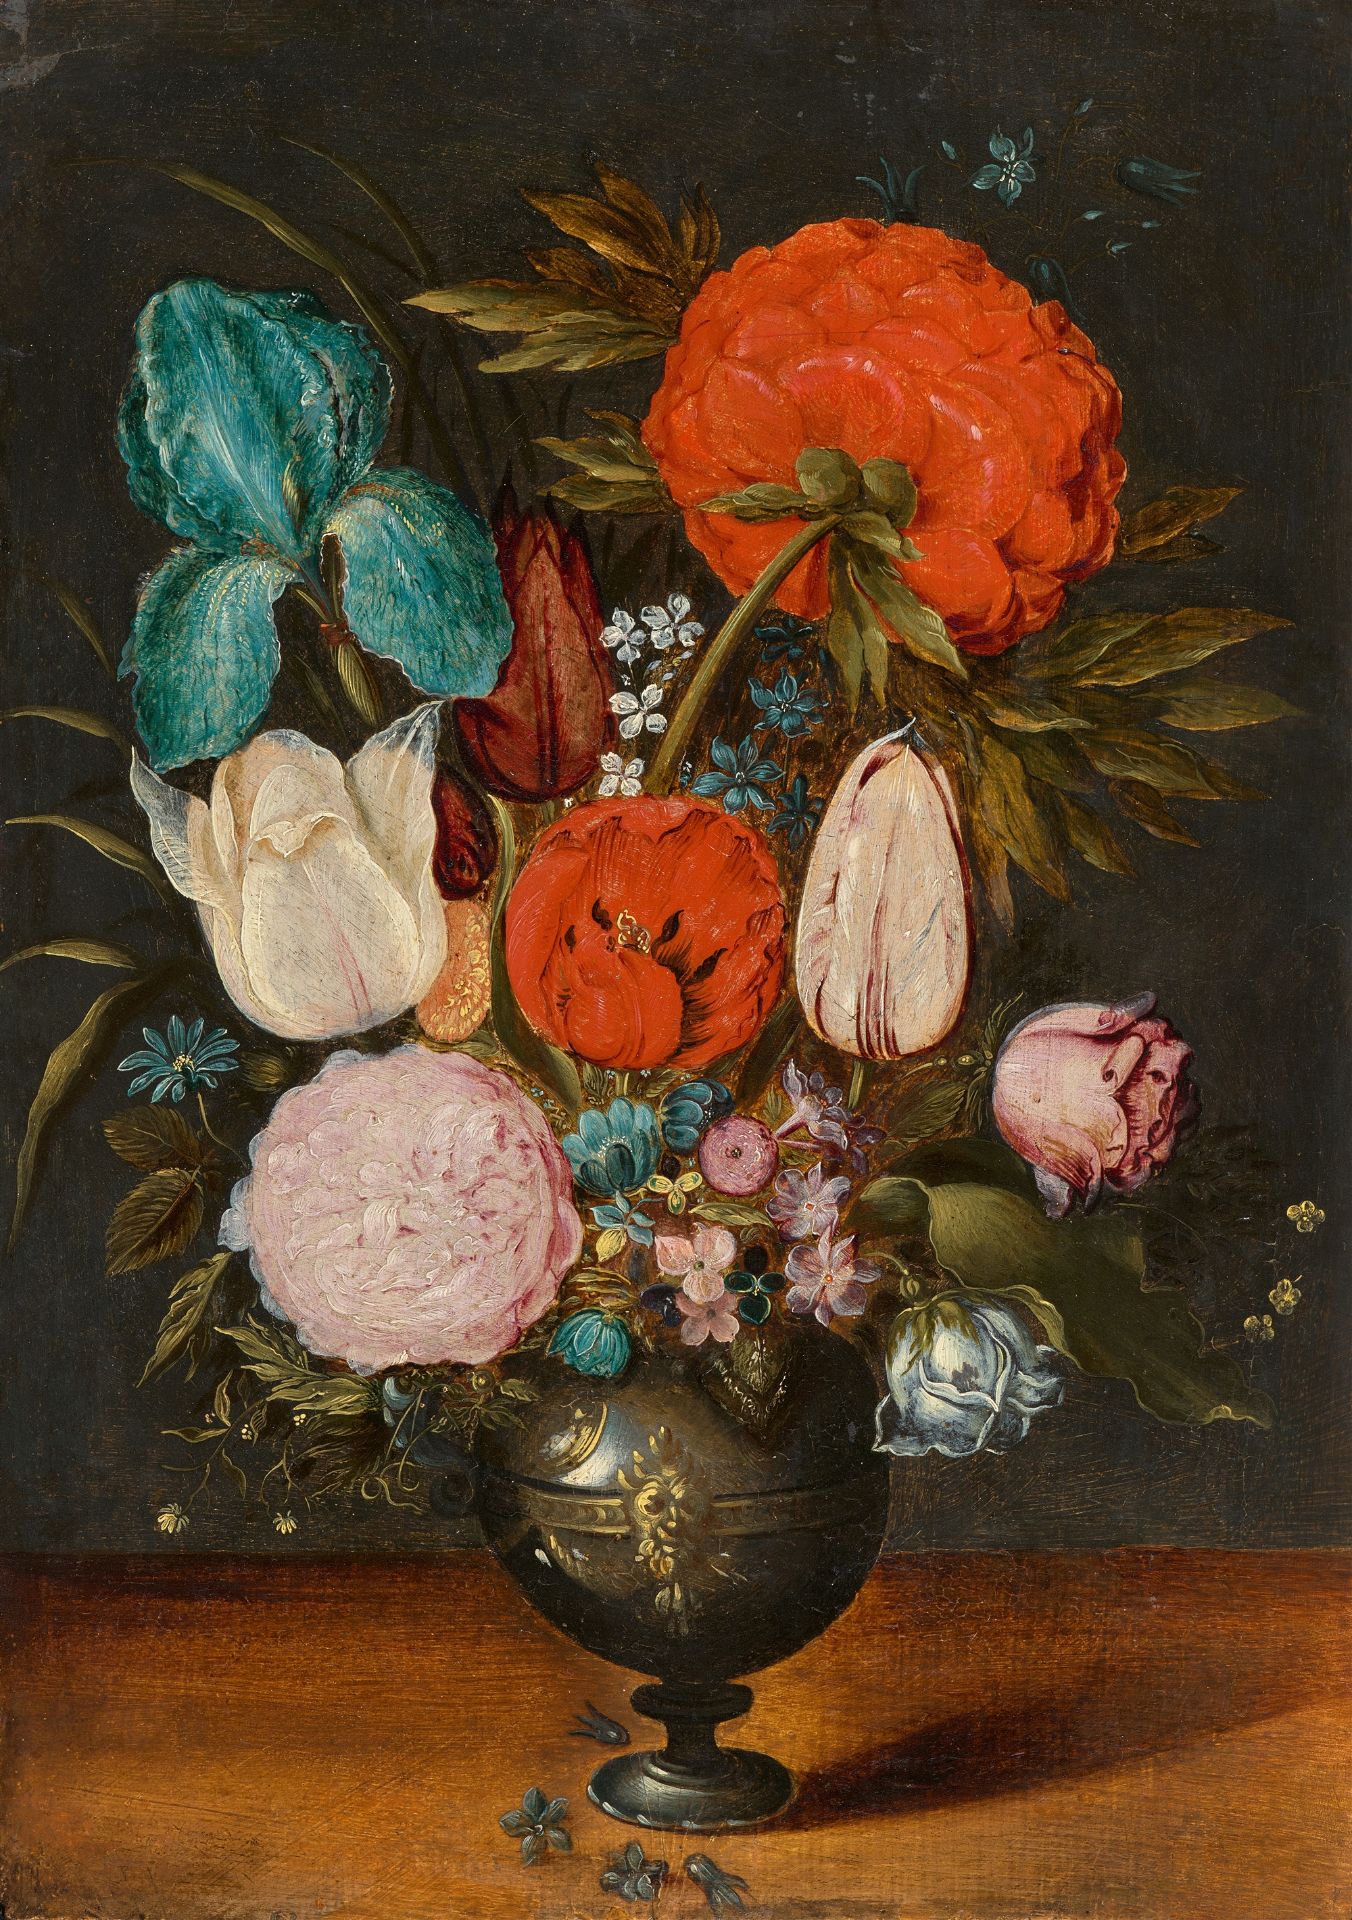 Jan Brueghel the Younger, Tulips, Iris, Roses and Peonies in a Vase